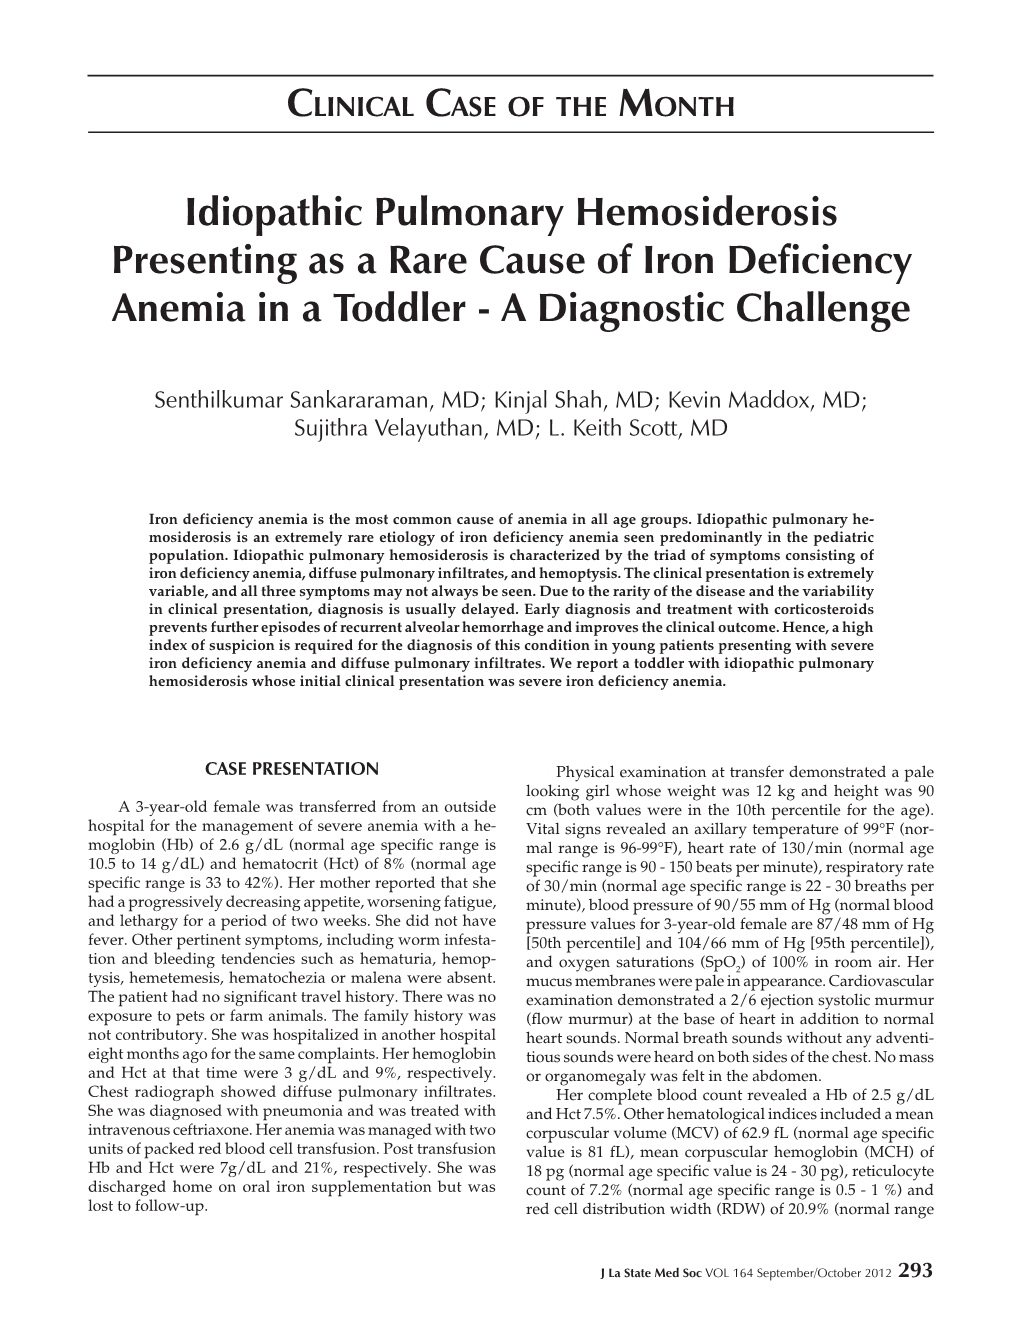 Idiopathic Pulmonary Hemosiderosis Presenting As a Rare Cause of Iron Deficiency Anemia in a Toddler - a Diagnostic Challenge